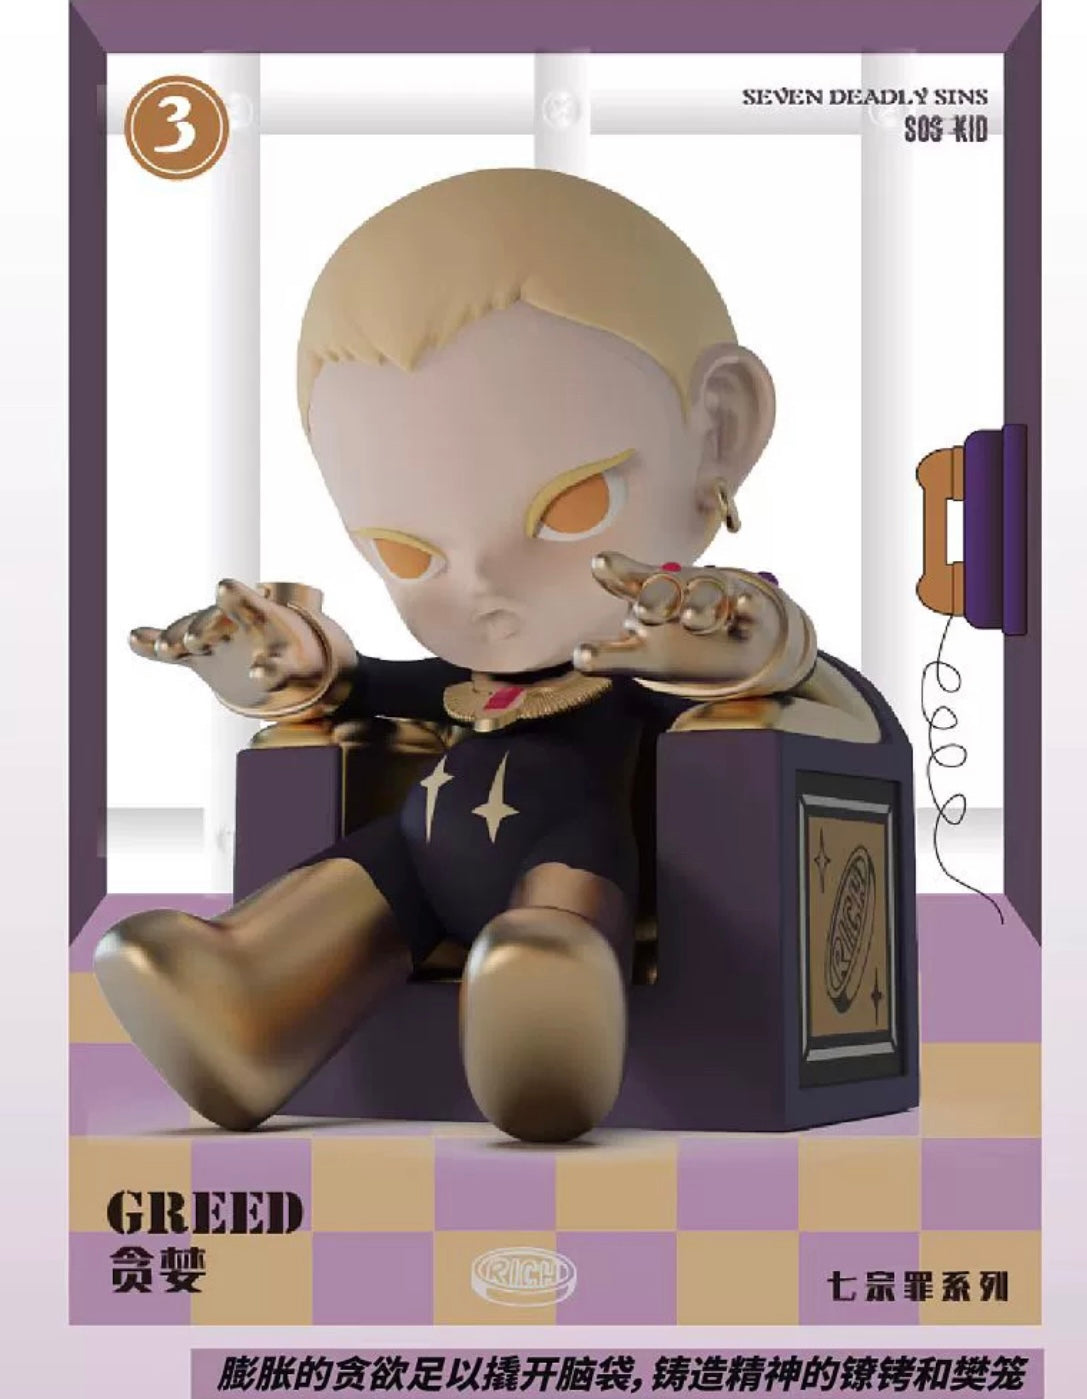 【SALE-BIG DISCOUNT】SOS KID-series 3 seven deadly sins toy doll